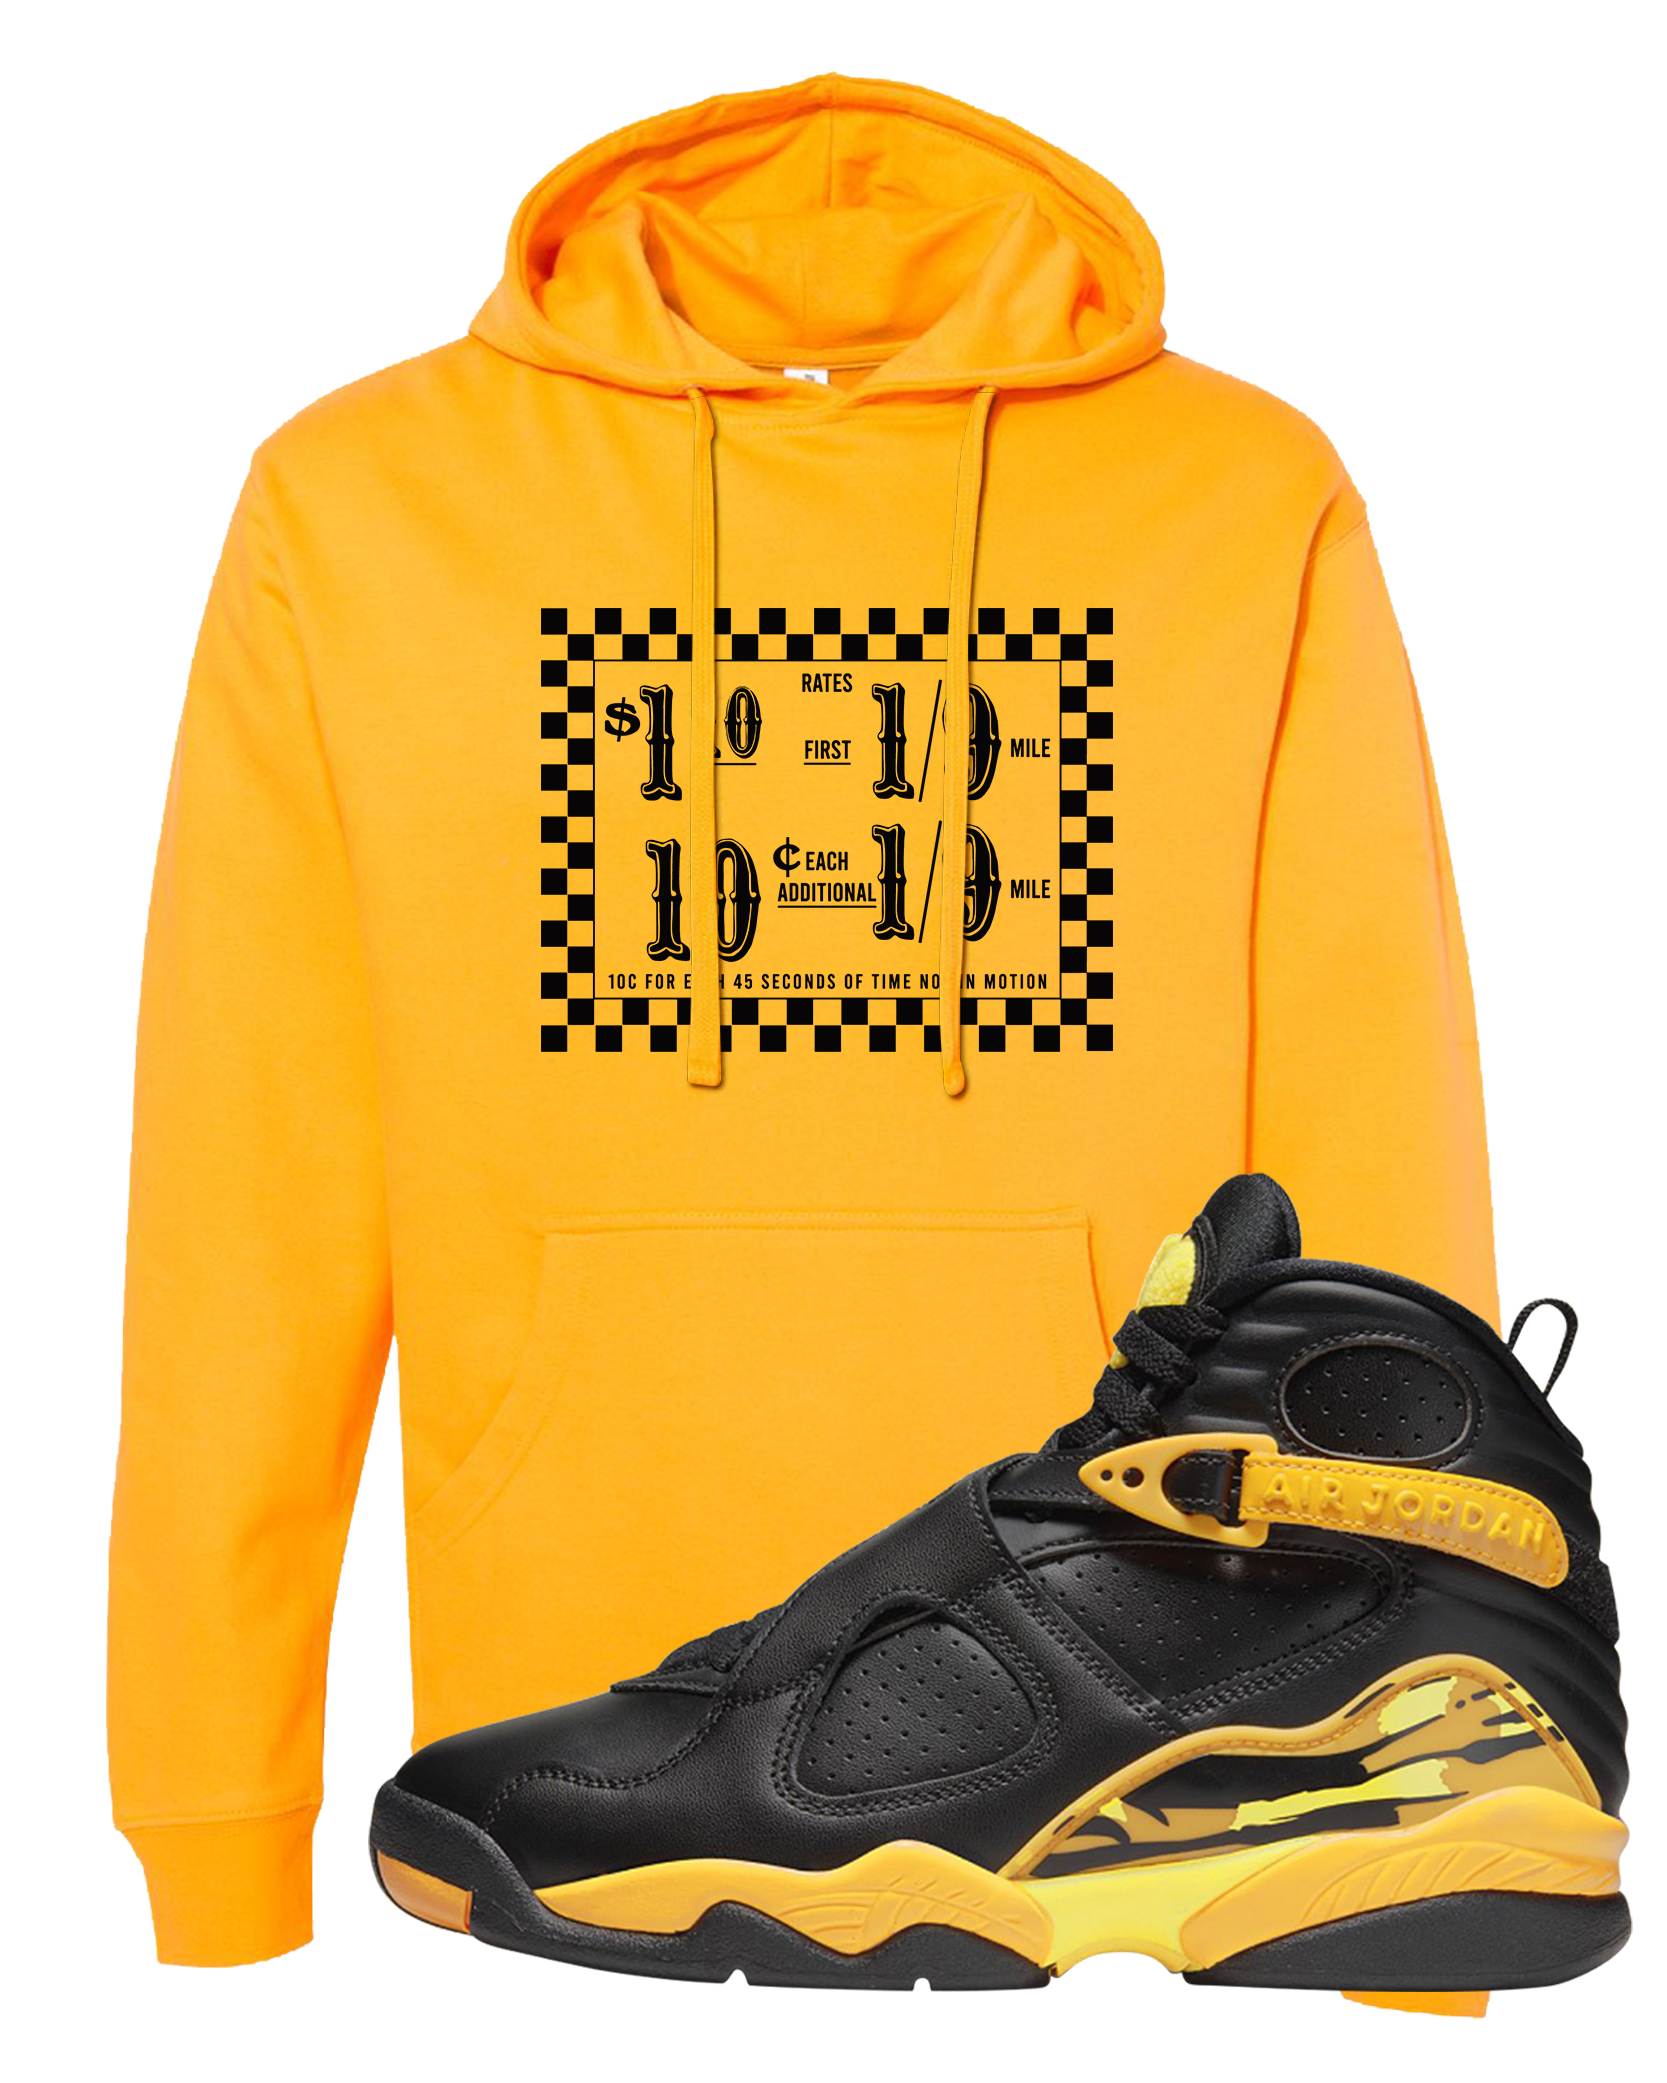 Taxi 8s Hoodie | Taxi Fare Ticket, Gold